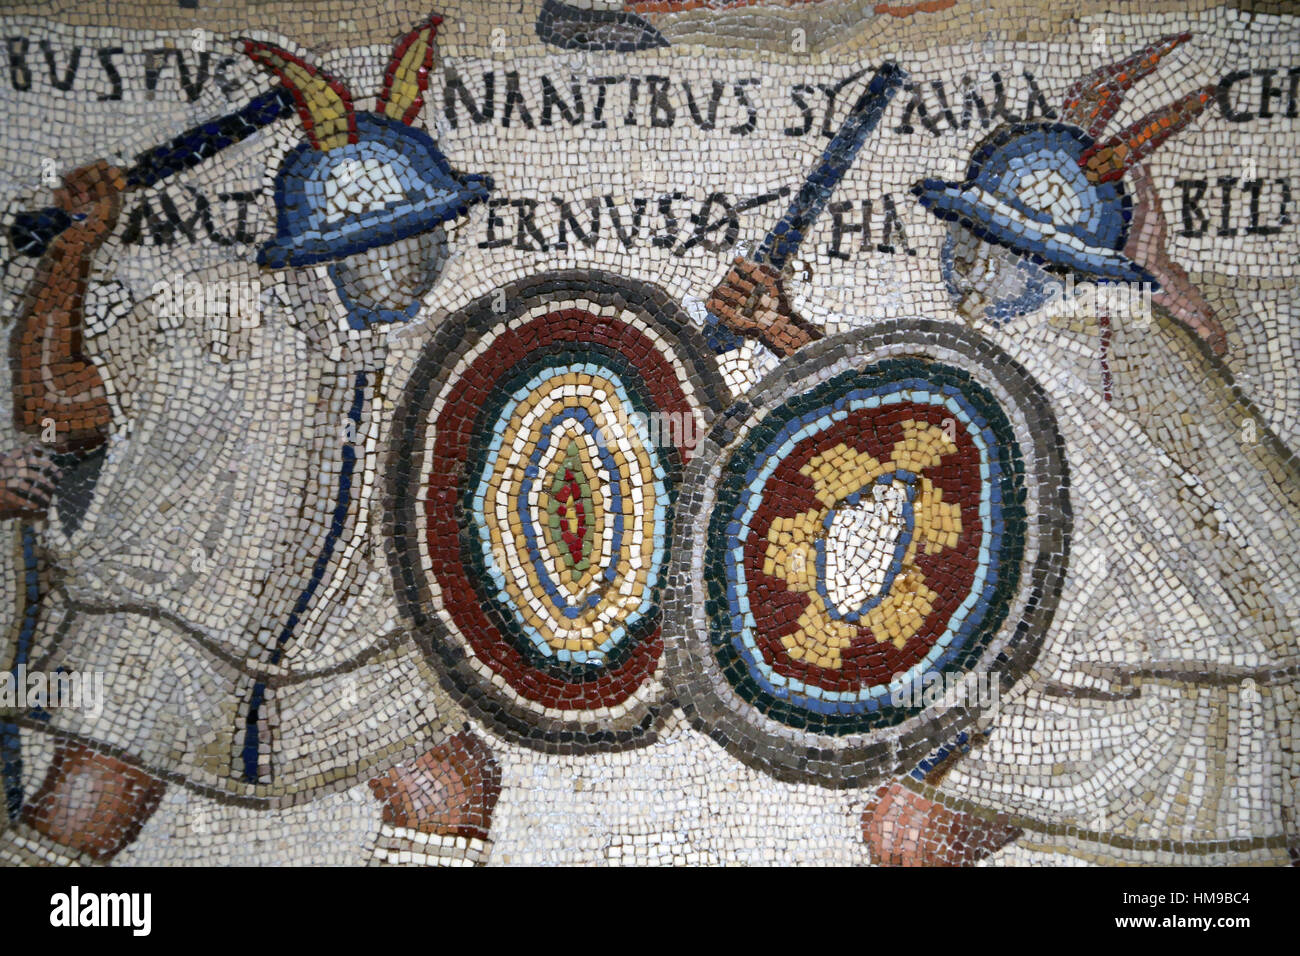 Gladiator fight. Mosaic. 3rd century. Rome. Two Eques flanked by two lanistae. National Archaeological Museum, Madrid. Spain. Stock Photo